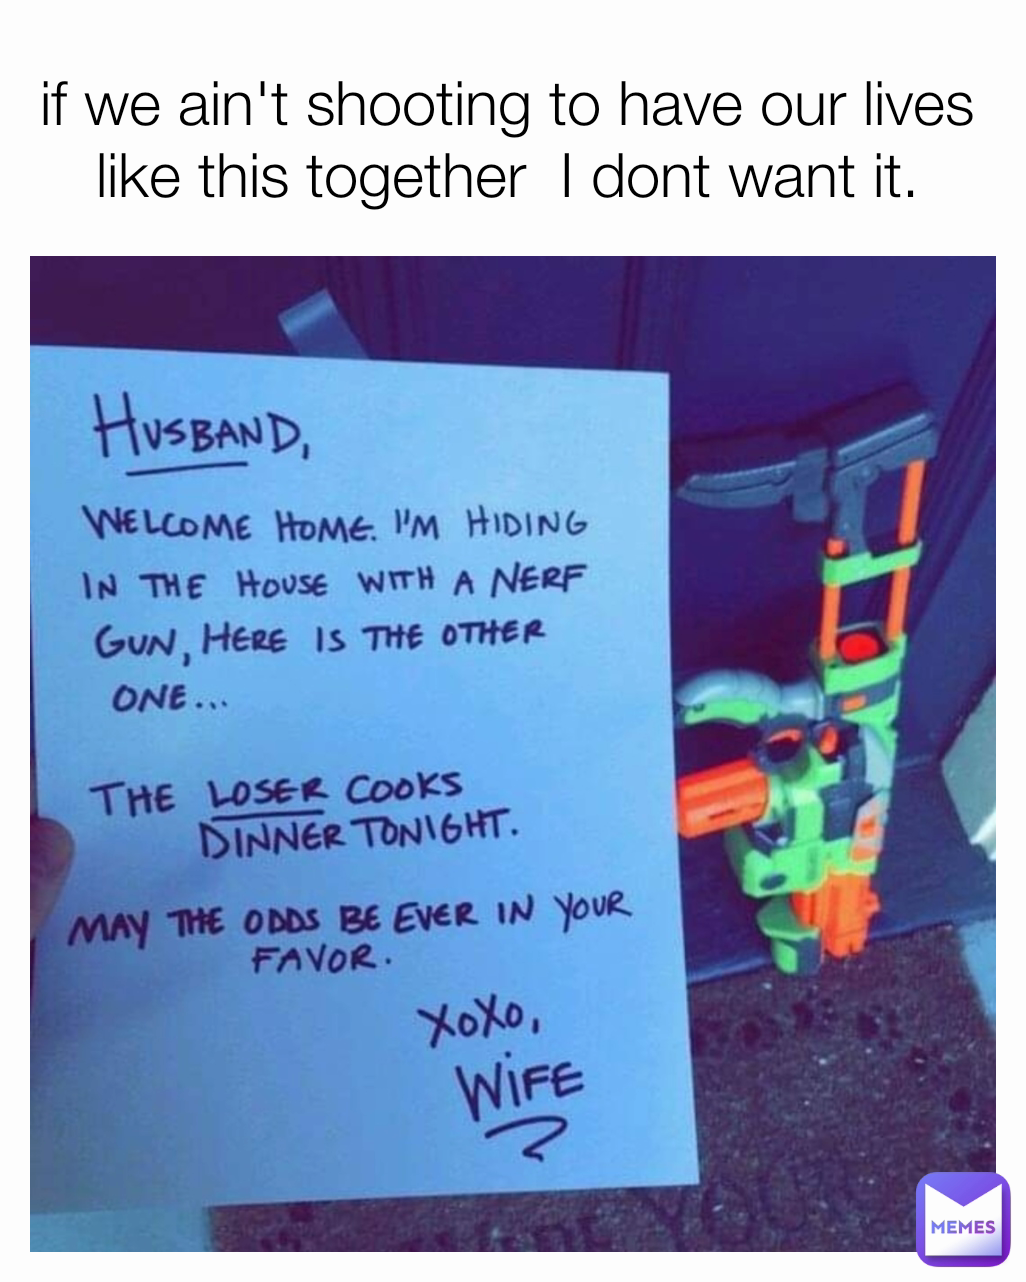 if we ain't shooting to have our lives like this together  I dont want it.